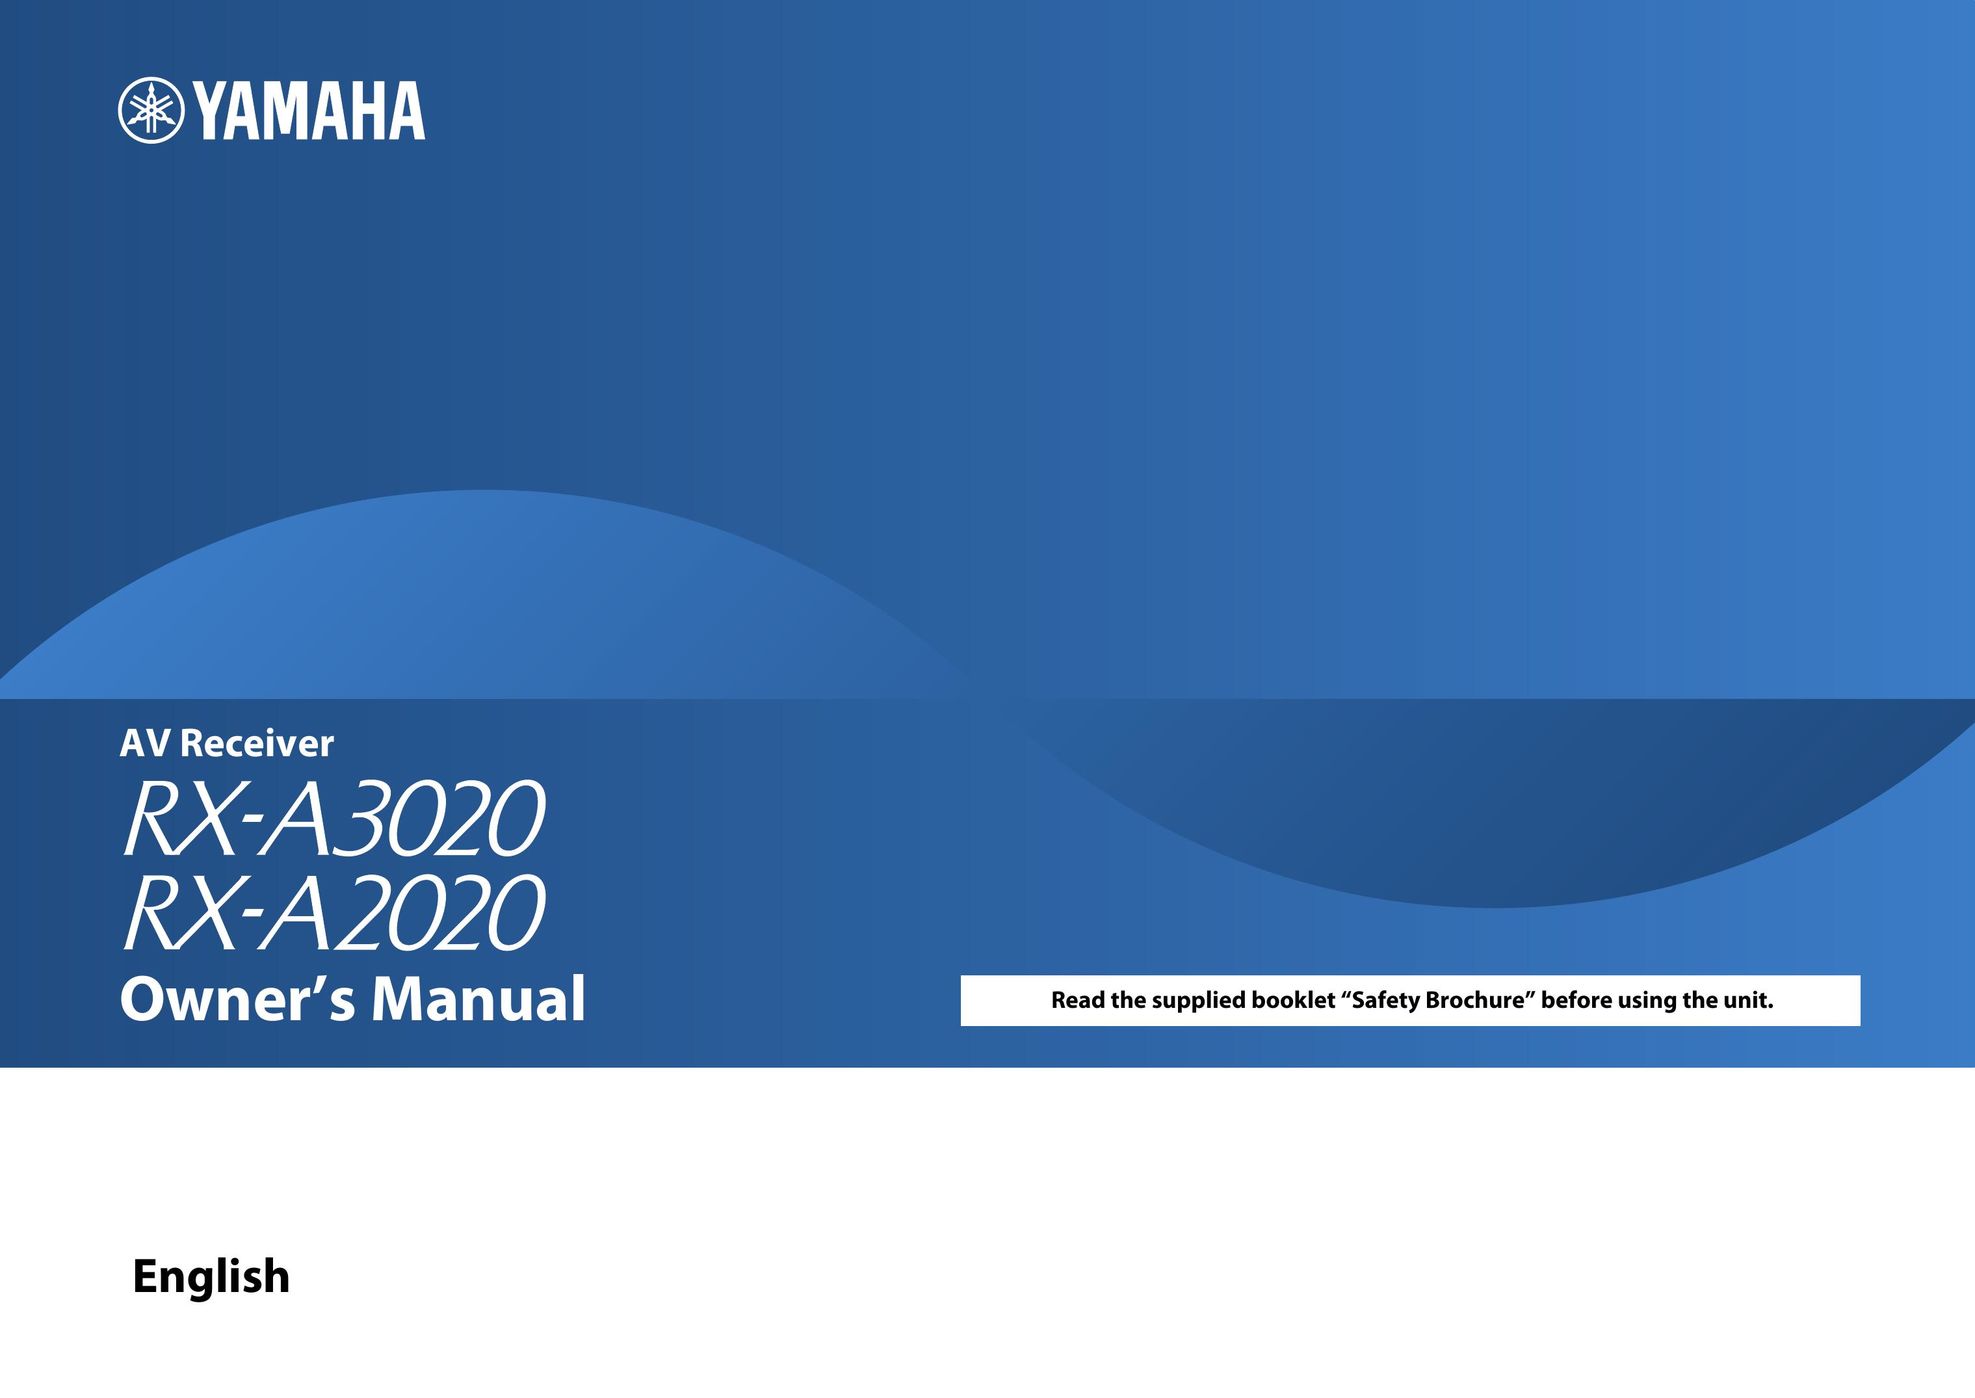 Yamaha AVENTAGE RX-A2020 Stereo Receiver User Manual